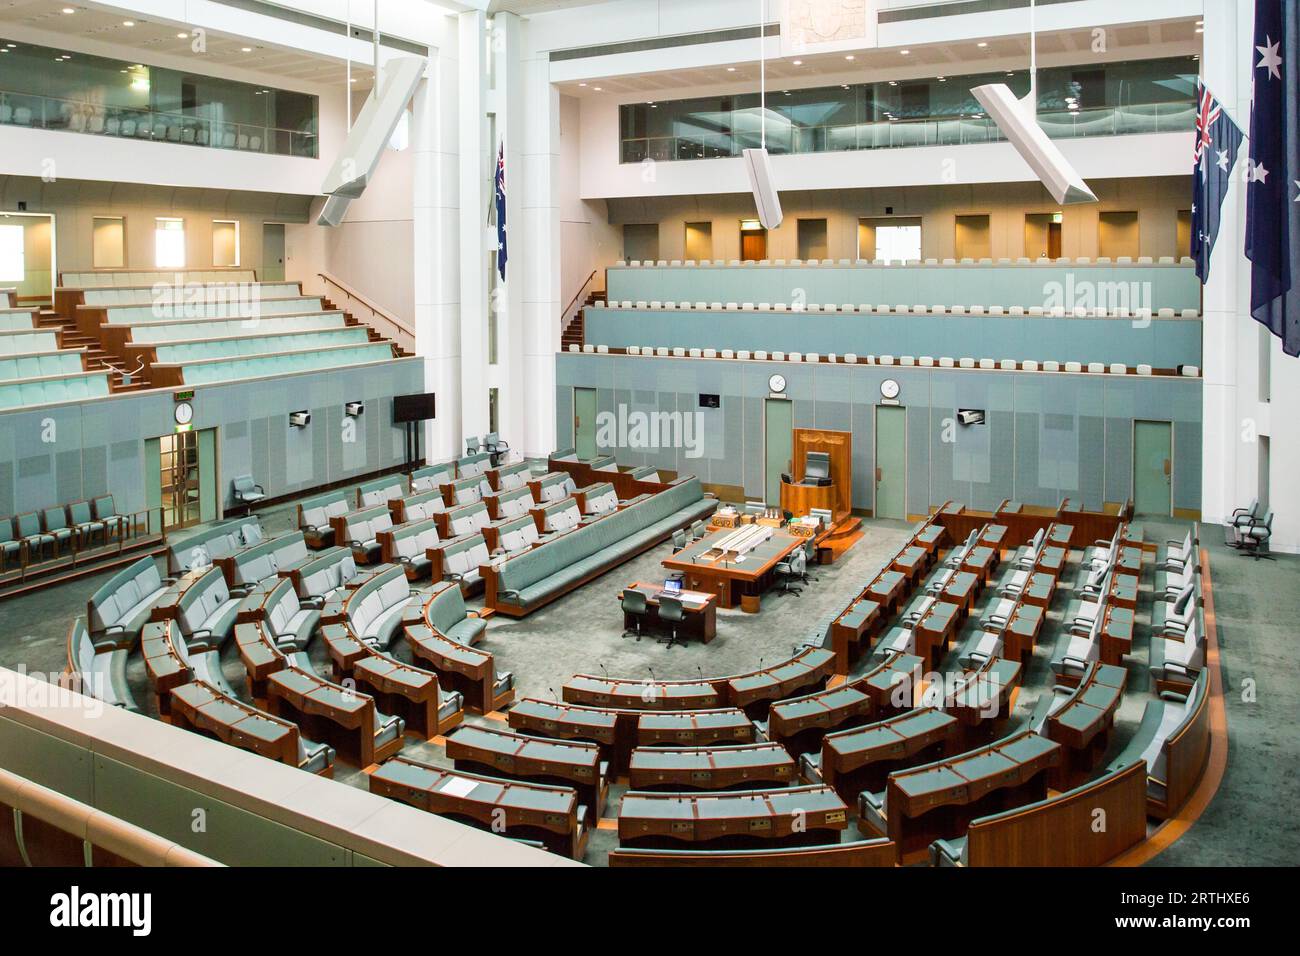 CANBERRA, AUSTRALIA, MAR 25, 2016: Interior view of the House of Representatives in Parliament House, Canberra, Australia Stock Photo